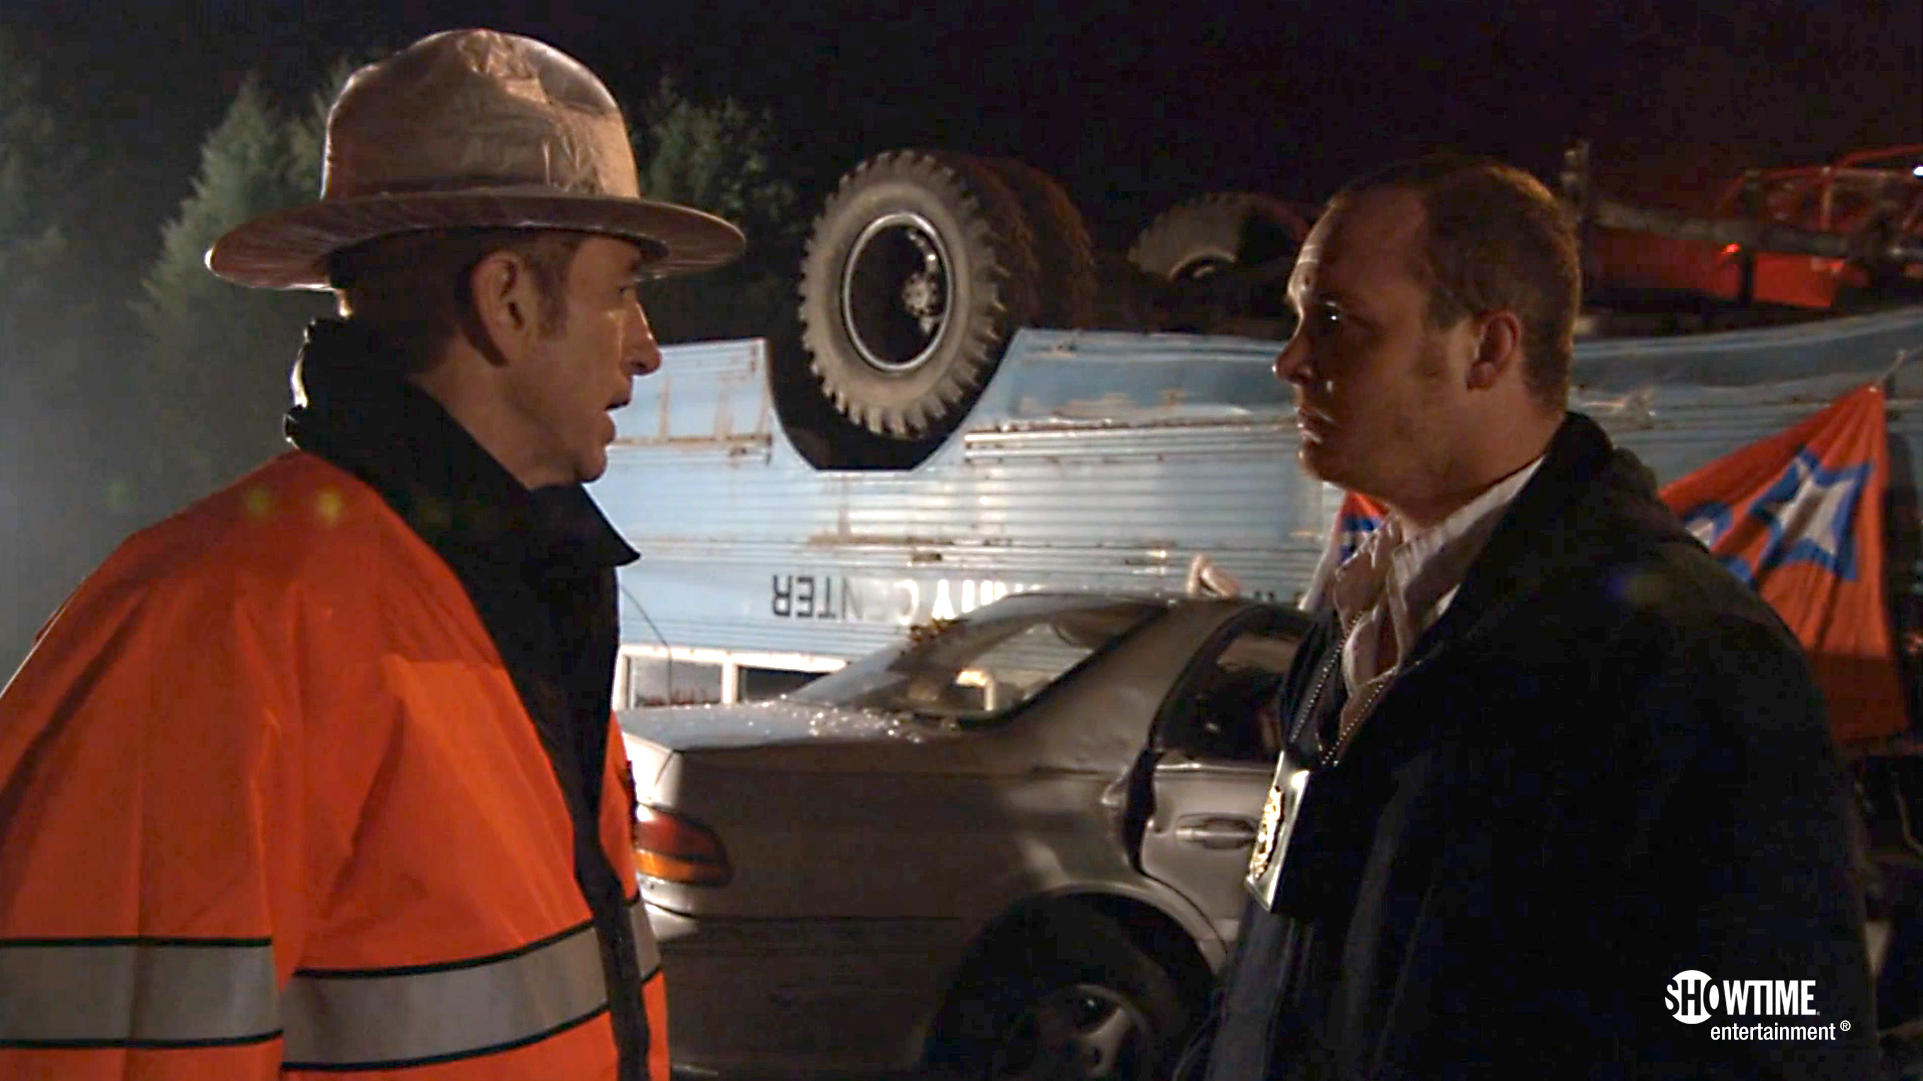 Bill Thorpe with Ethan Embry in the Showtime TV series 